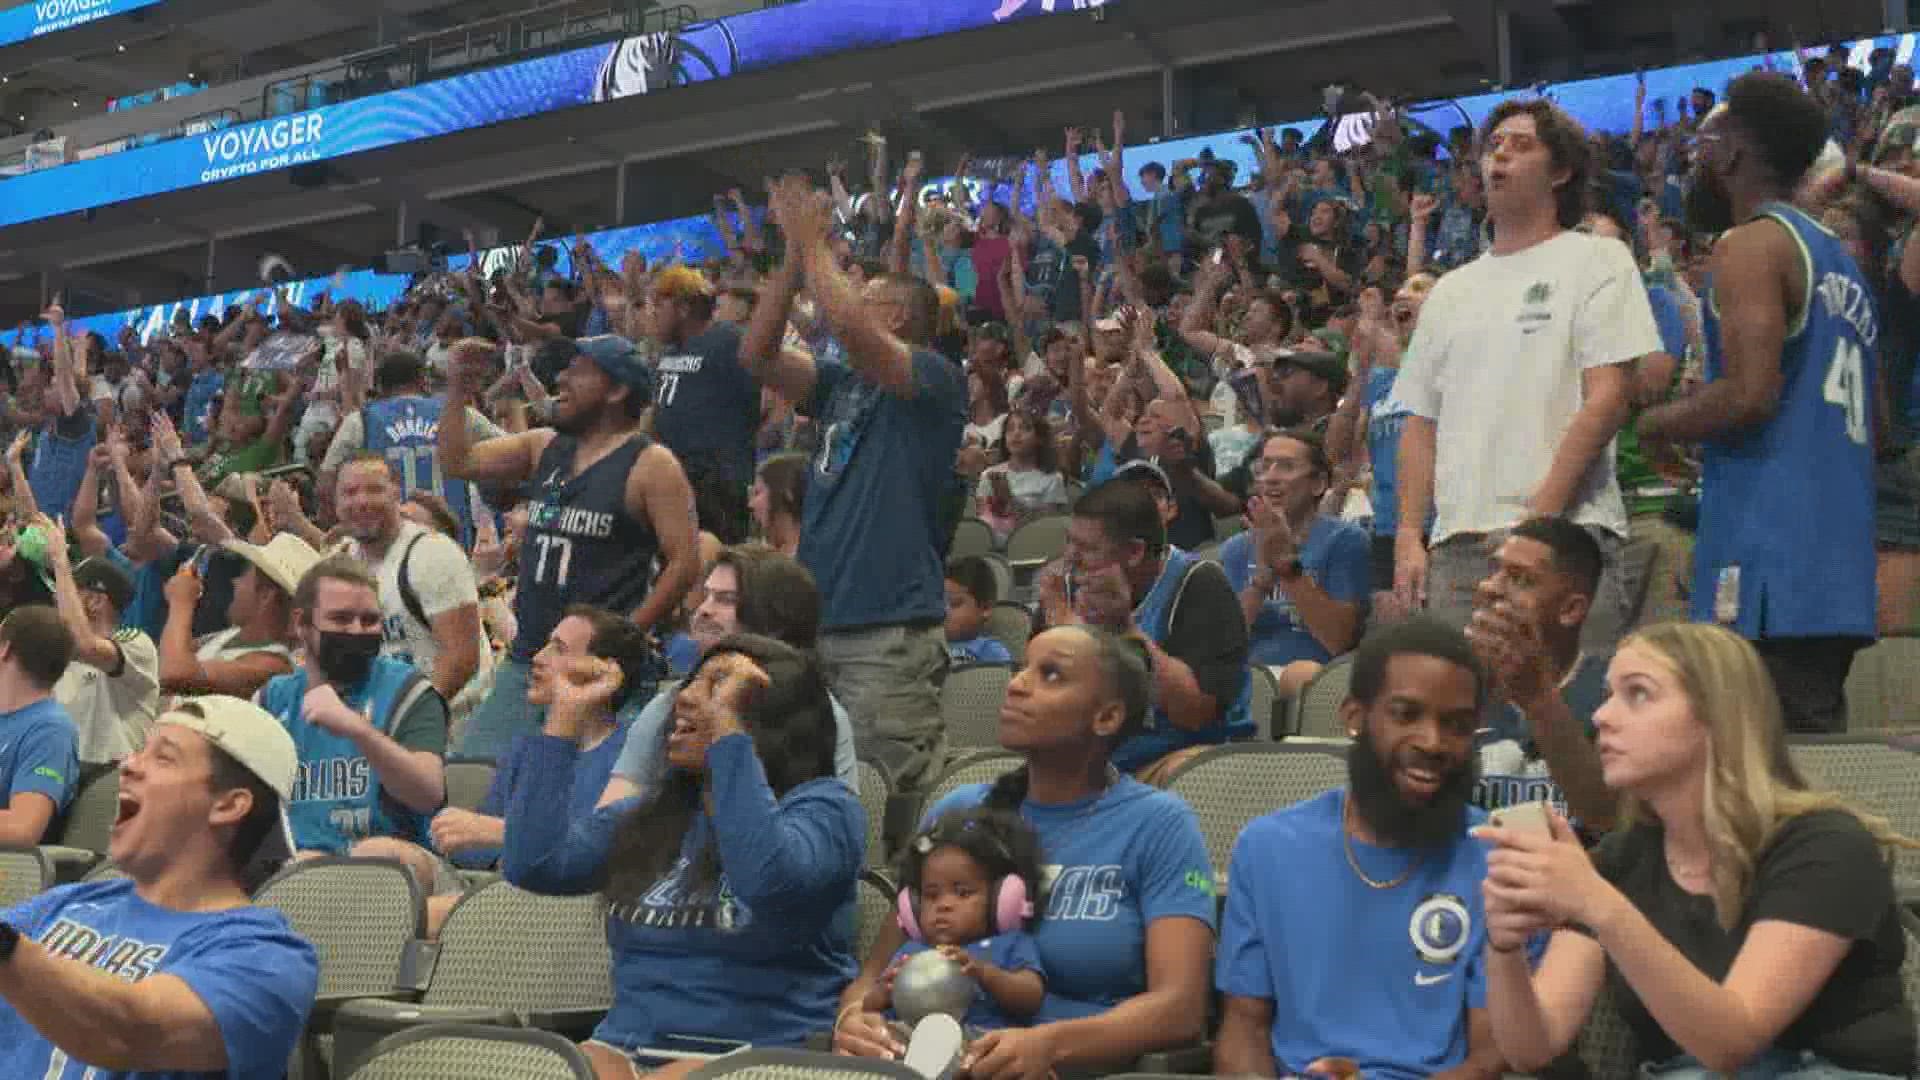 Dallas Mavericks fans watched their favorite team dominate the Suns to advance to the Western Conference Finals.